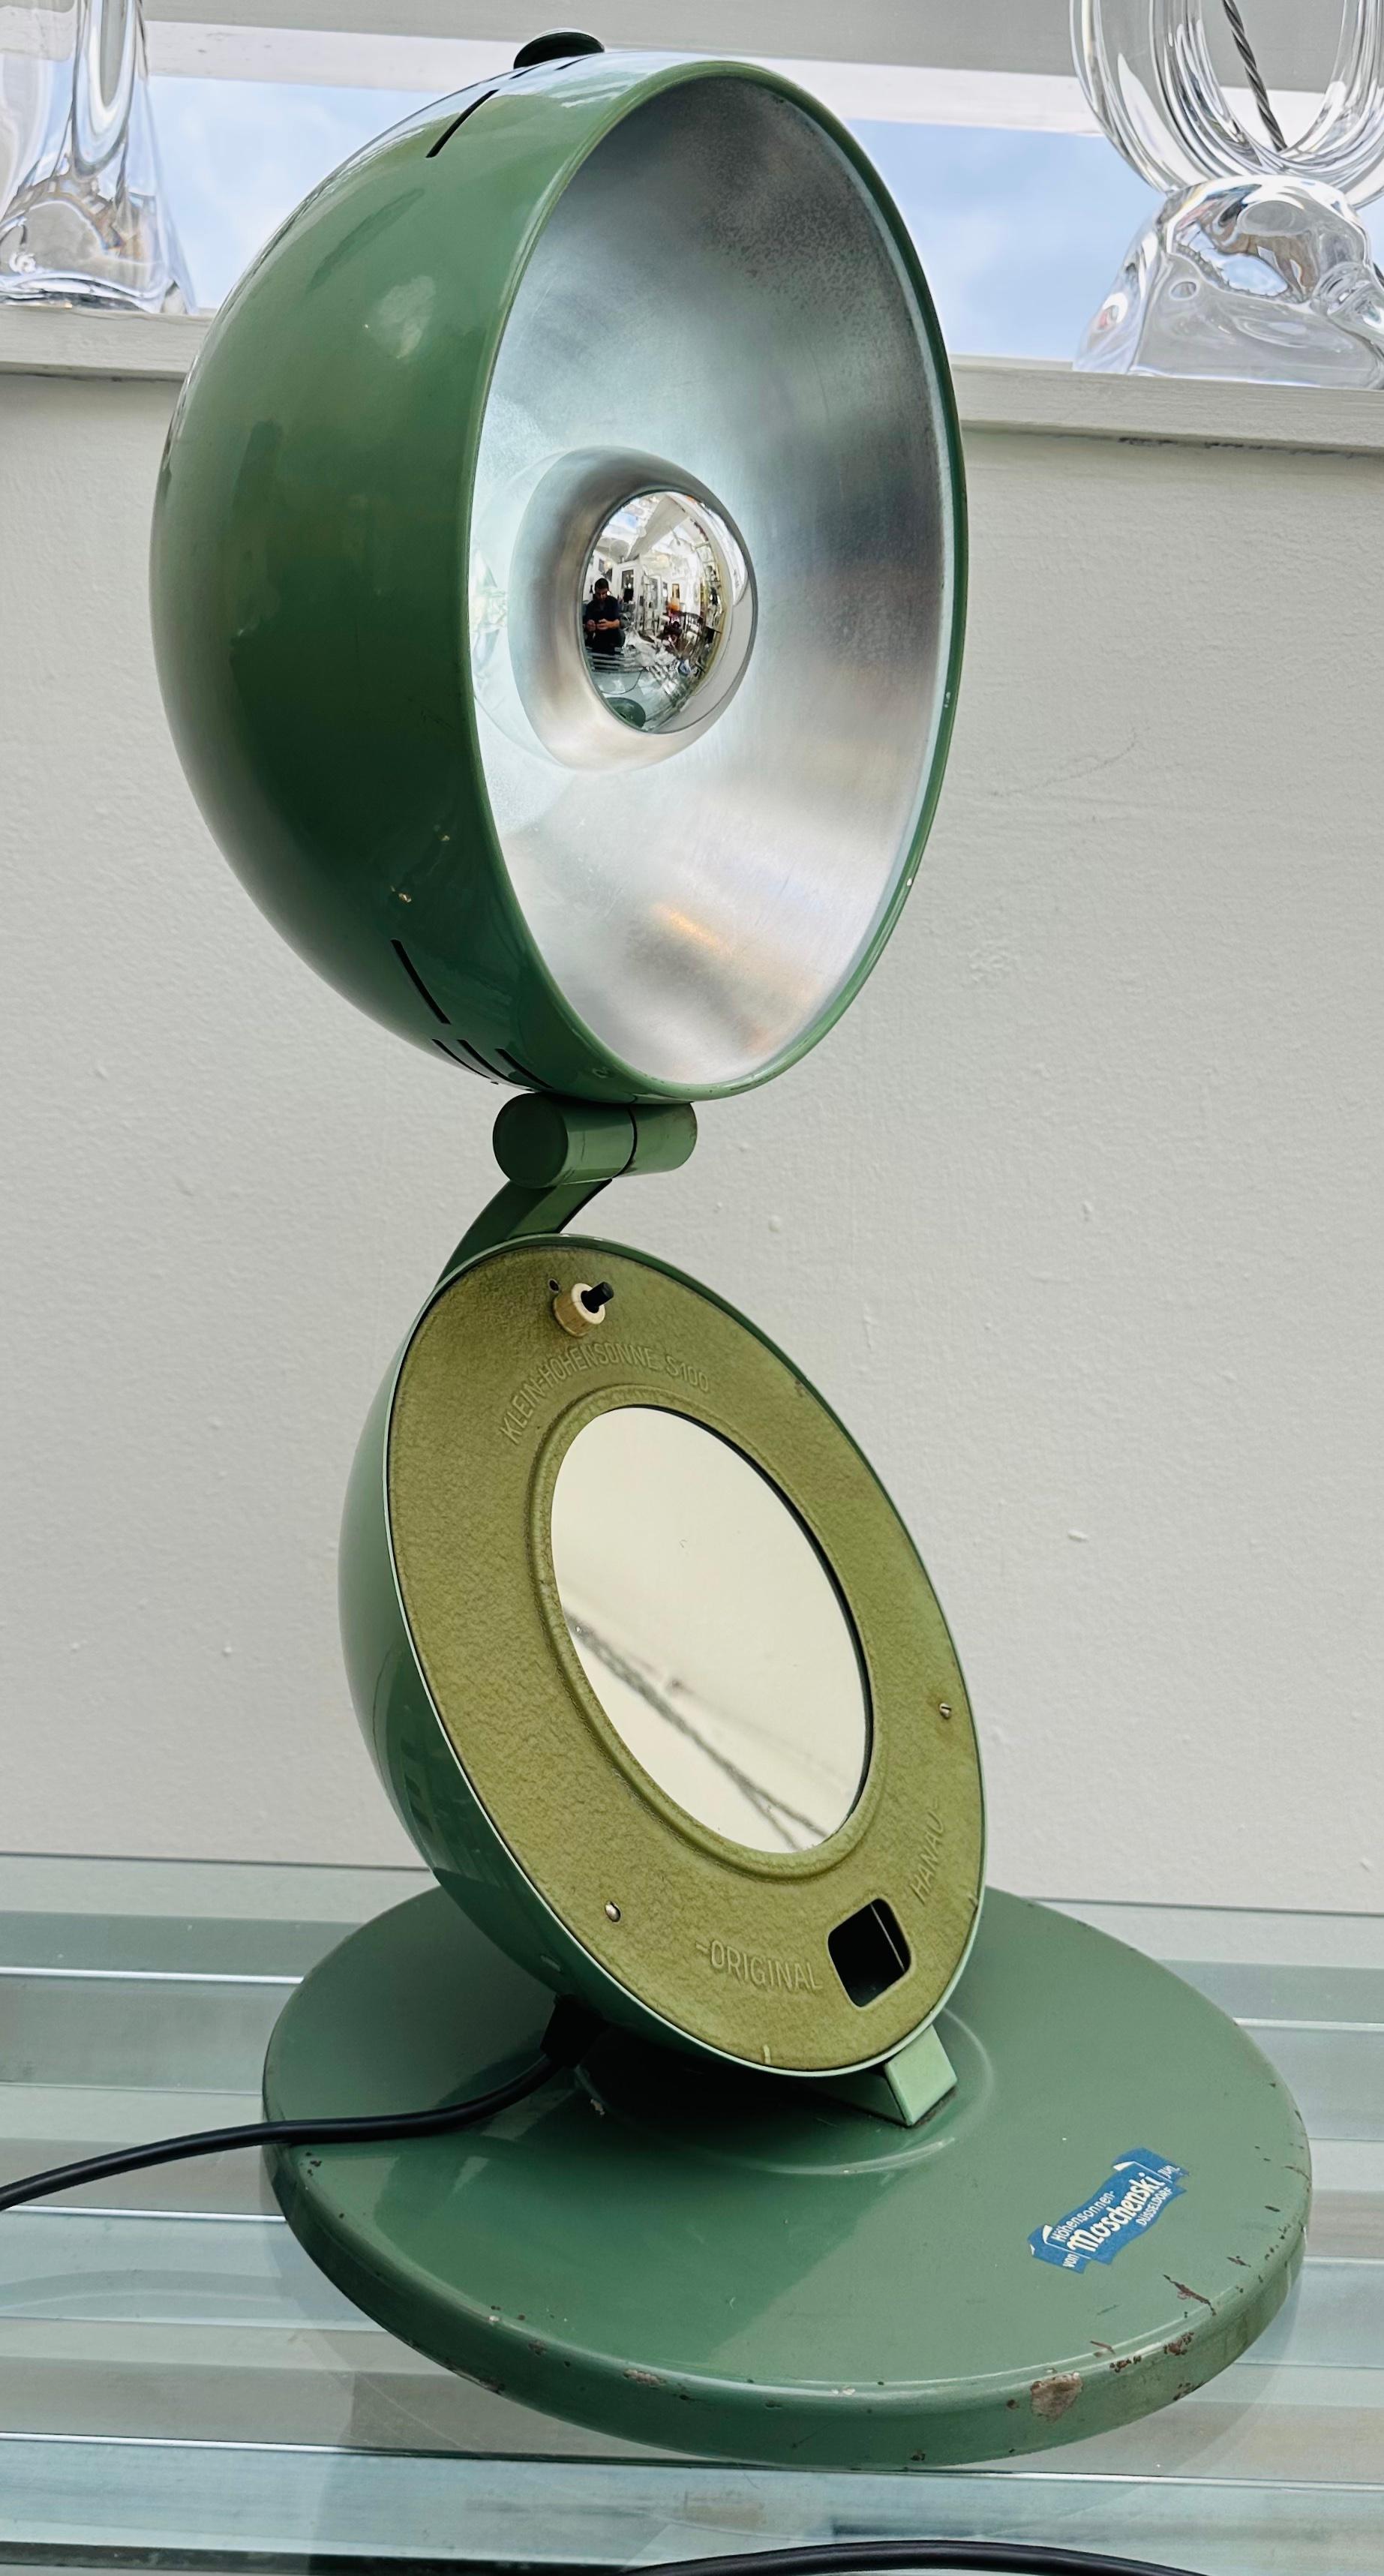 An original circa 1935 German Bauhaus light therapy workshop Industrial lamp in jade-green lacquered steel. The circular base which still retains the original maker's label supports a sphere which opens to reveal a mirror in the lower half part and